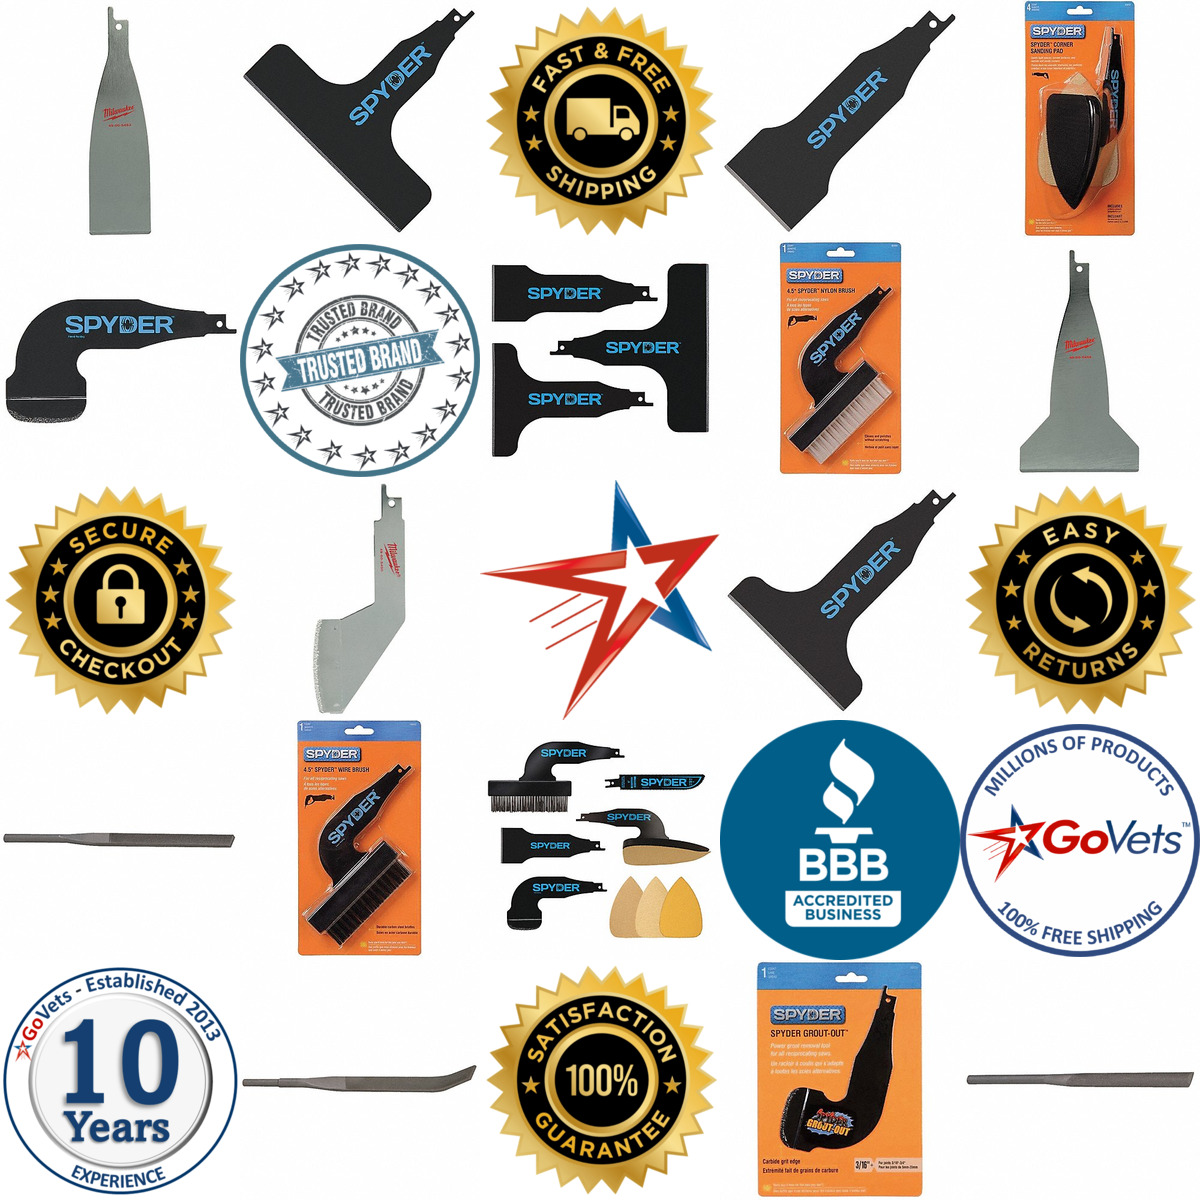 A selection of Reciprocating Saw Accessories products on GoVets